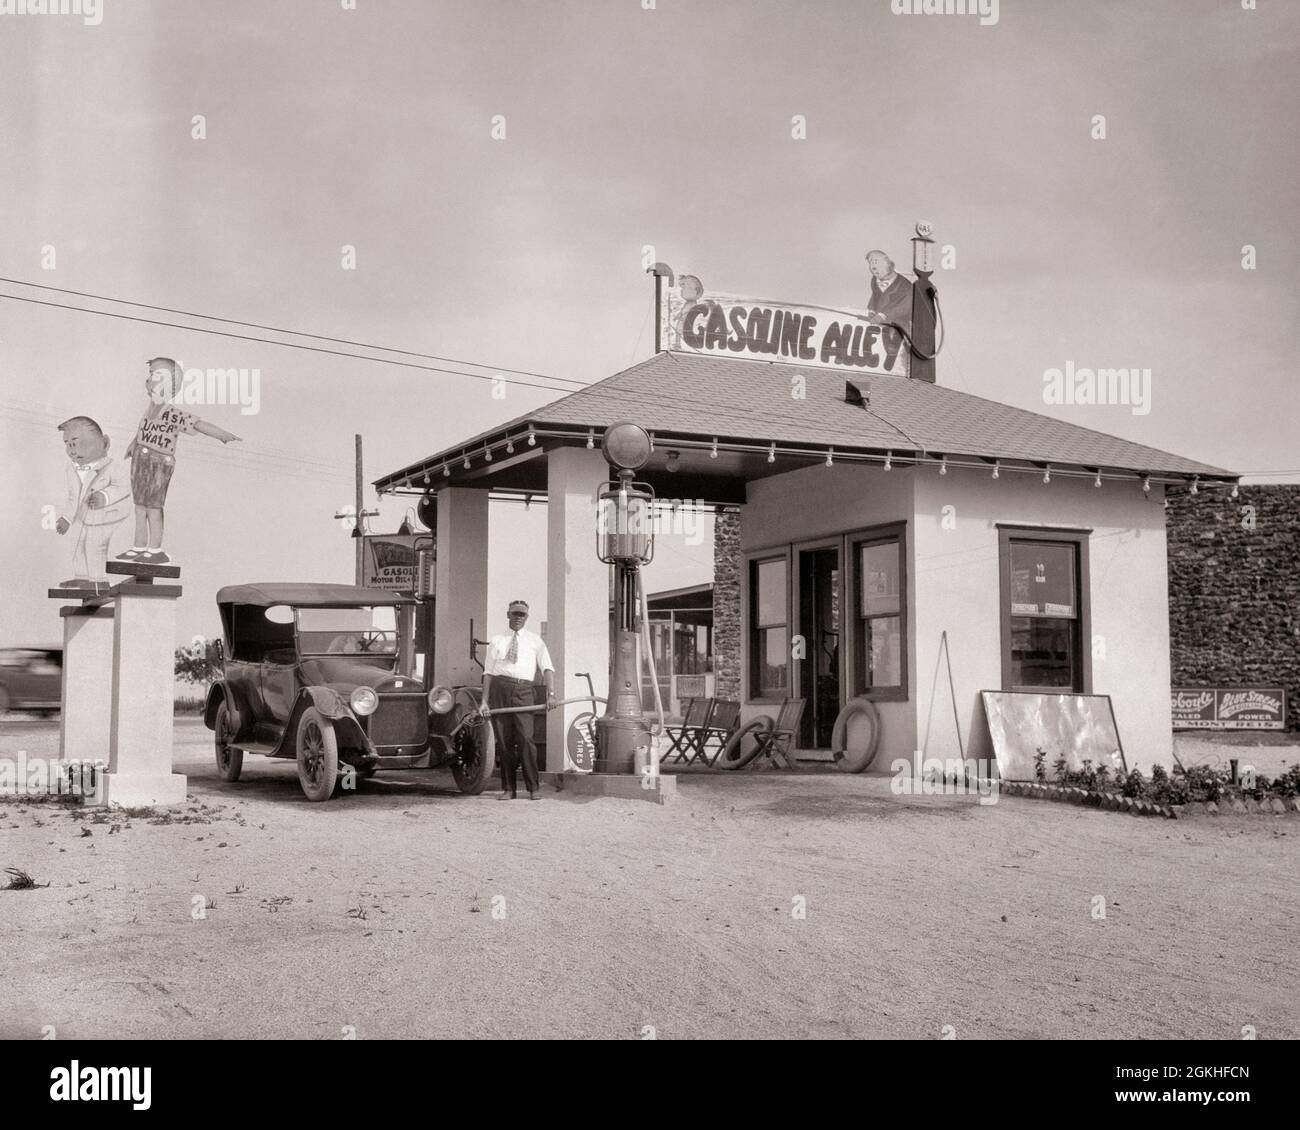 1930s GASOLINE ALLEY GAS STATION NAME WAS OBVIOUS SUGGESTION BY THE COMIC STRIP OF THE SAME NAME NEAR JOPLIN MISSOURI USA - q32052 CPC001 HARS RURAL COPY SPACE FULL-LENGTH HIGHWAY PERSONS AUTOMOBILE MALES FUEL BUILDINGS TRANSPORTATION MIDDLE-AGED B&W MIDDLE-AGED MAN EYE CONTACT SAME SKILL OCCUPATION SKILLS NAME PROPERTY GAS STATION CUSTOMER SERVICE AUTOS SERVICE STATION MISSOURI GAS PUMP BY SUGGESTION NEAR OCCUPATIONS REAL ESTATE GASOLINE CONCEPTUAL STRUCTURES 1931 AUTOMOBILES STYLISH VEHICLES EDIFICE STRIP COMIC STRIP CREATED PETROL PETROLEUM PROGRAM PURPOSE BUILT ROADSIDE BLACK AND WHITE Stock Photo